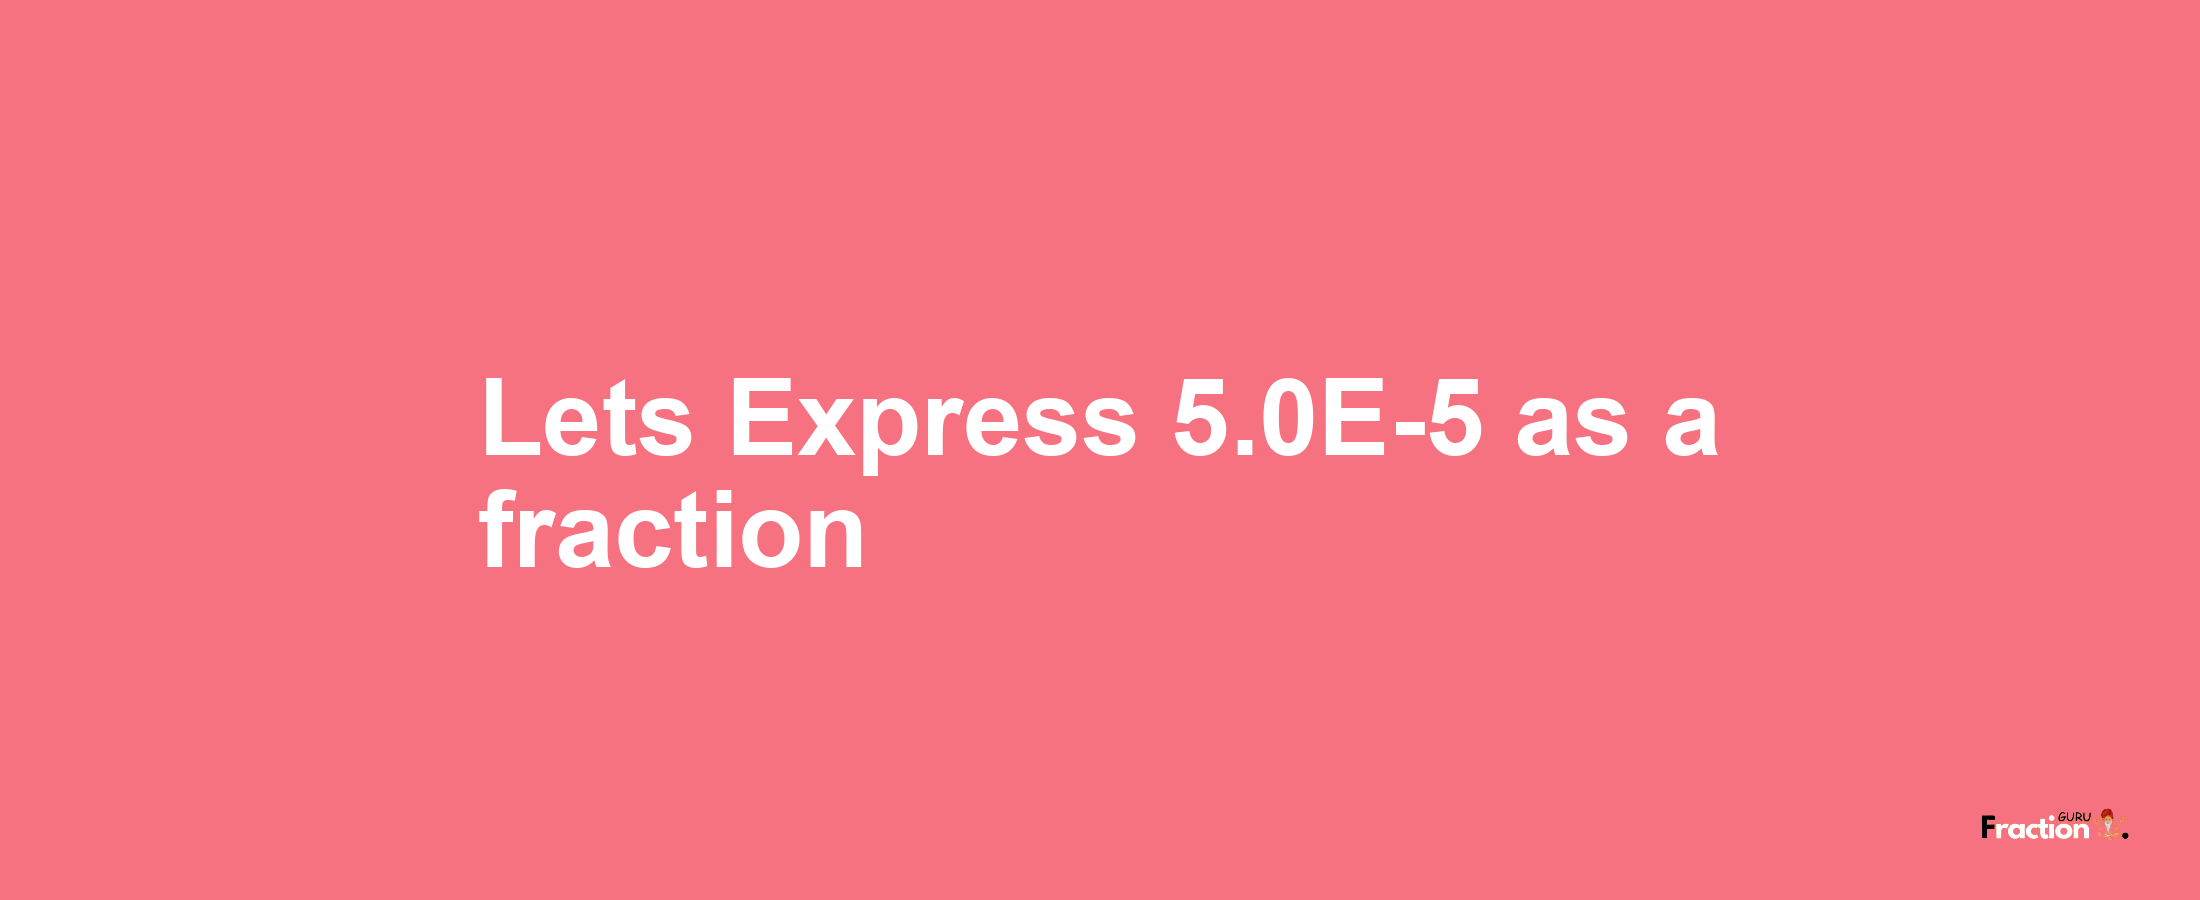 Lets Express 5.0E-5 as afraction